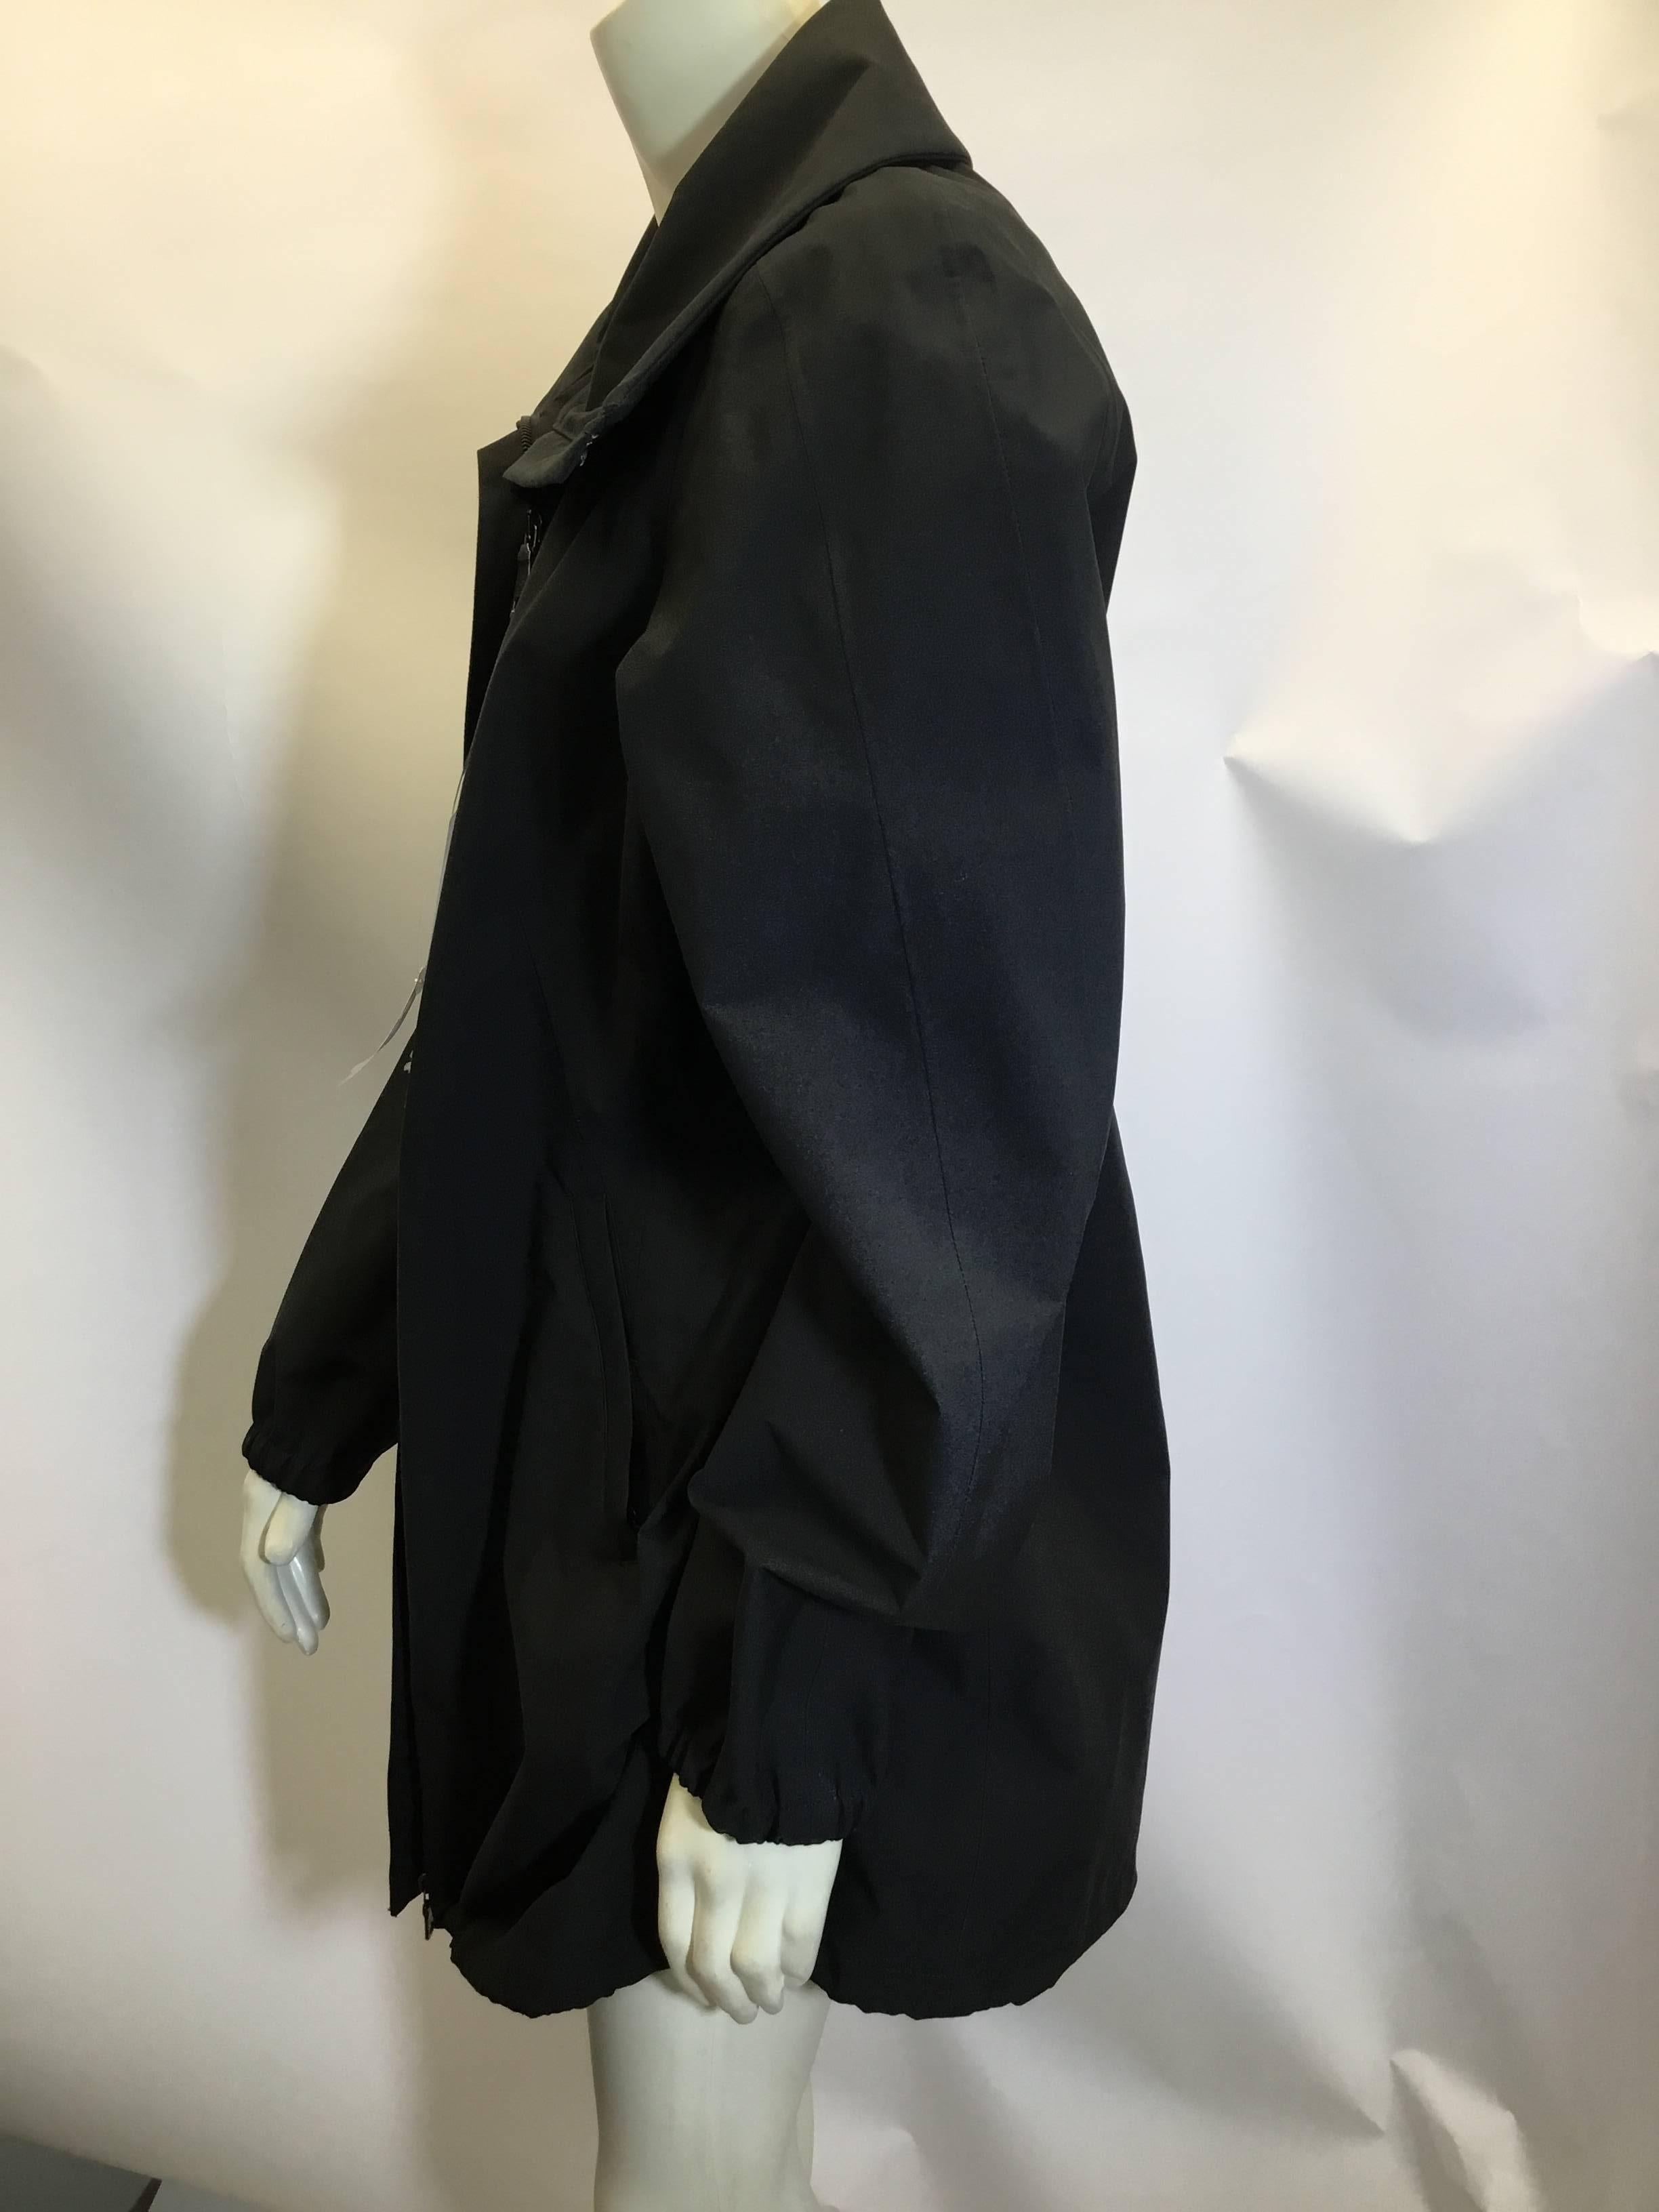 Prada Black NWT Wind Breaker Jacket In New Condition For Sale In Narberth, PA